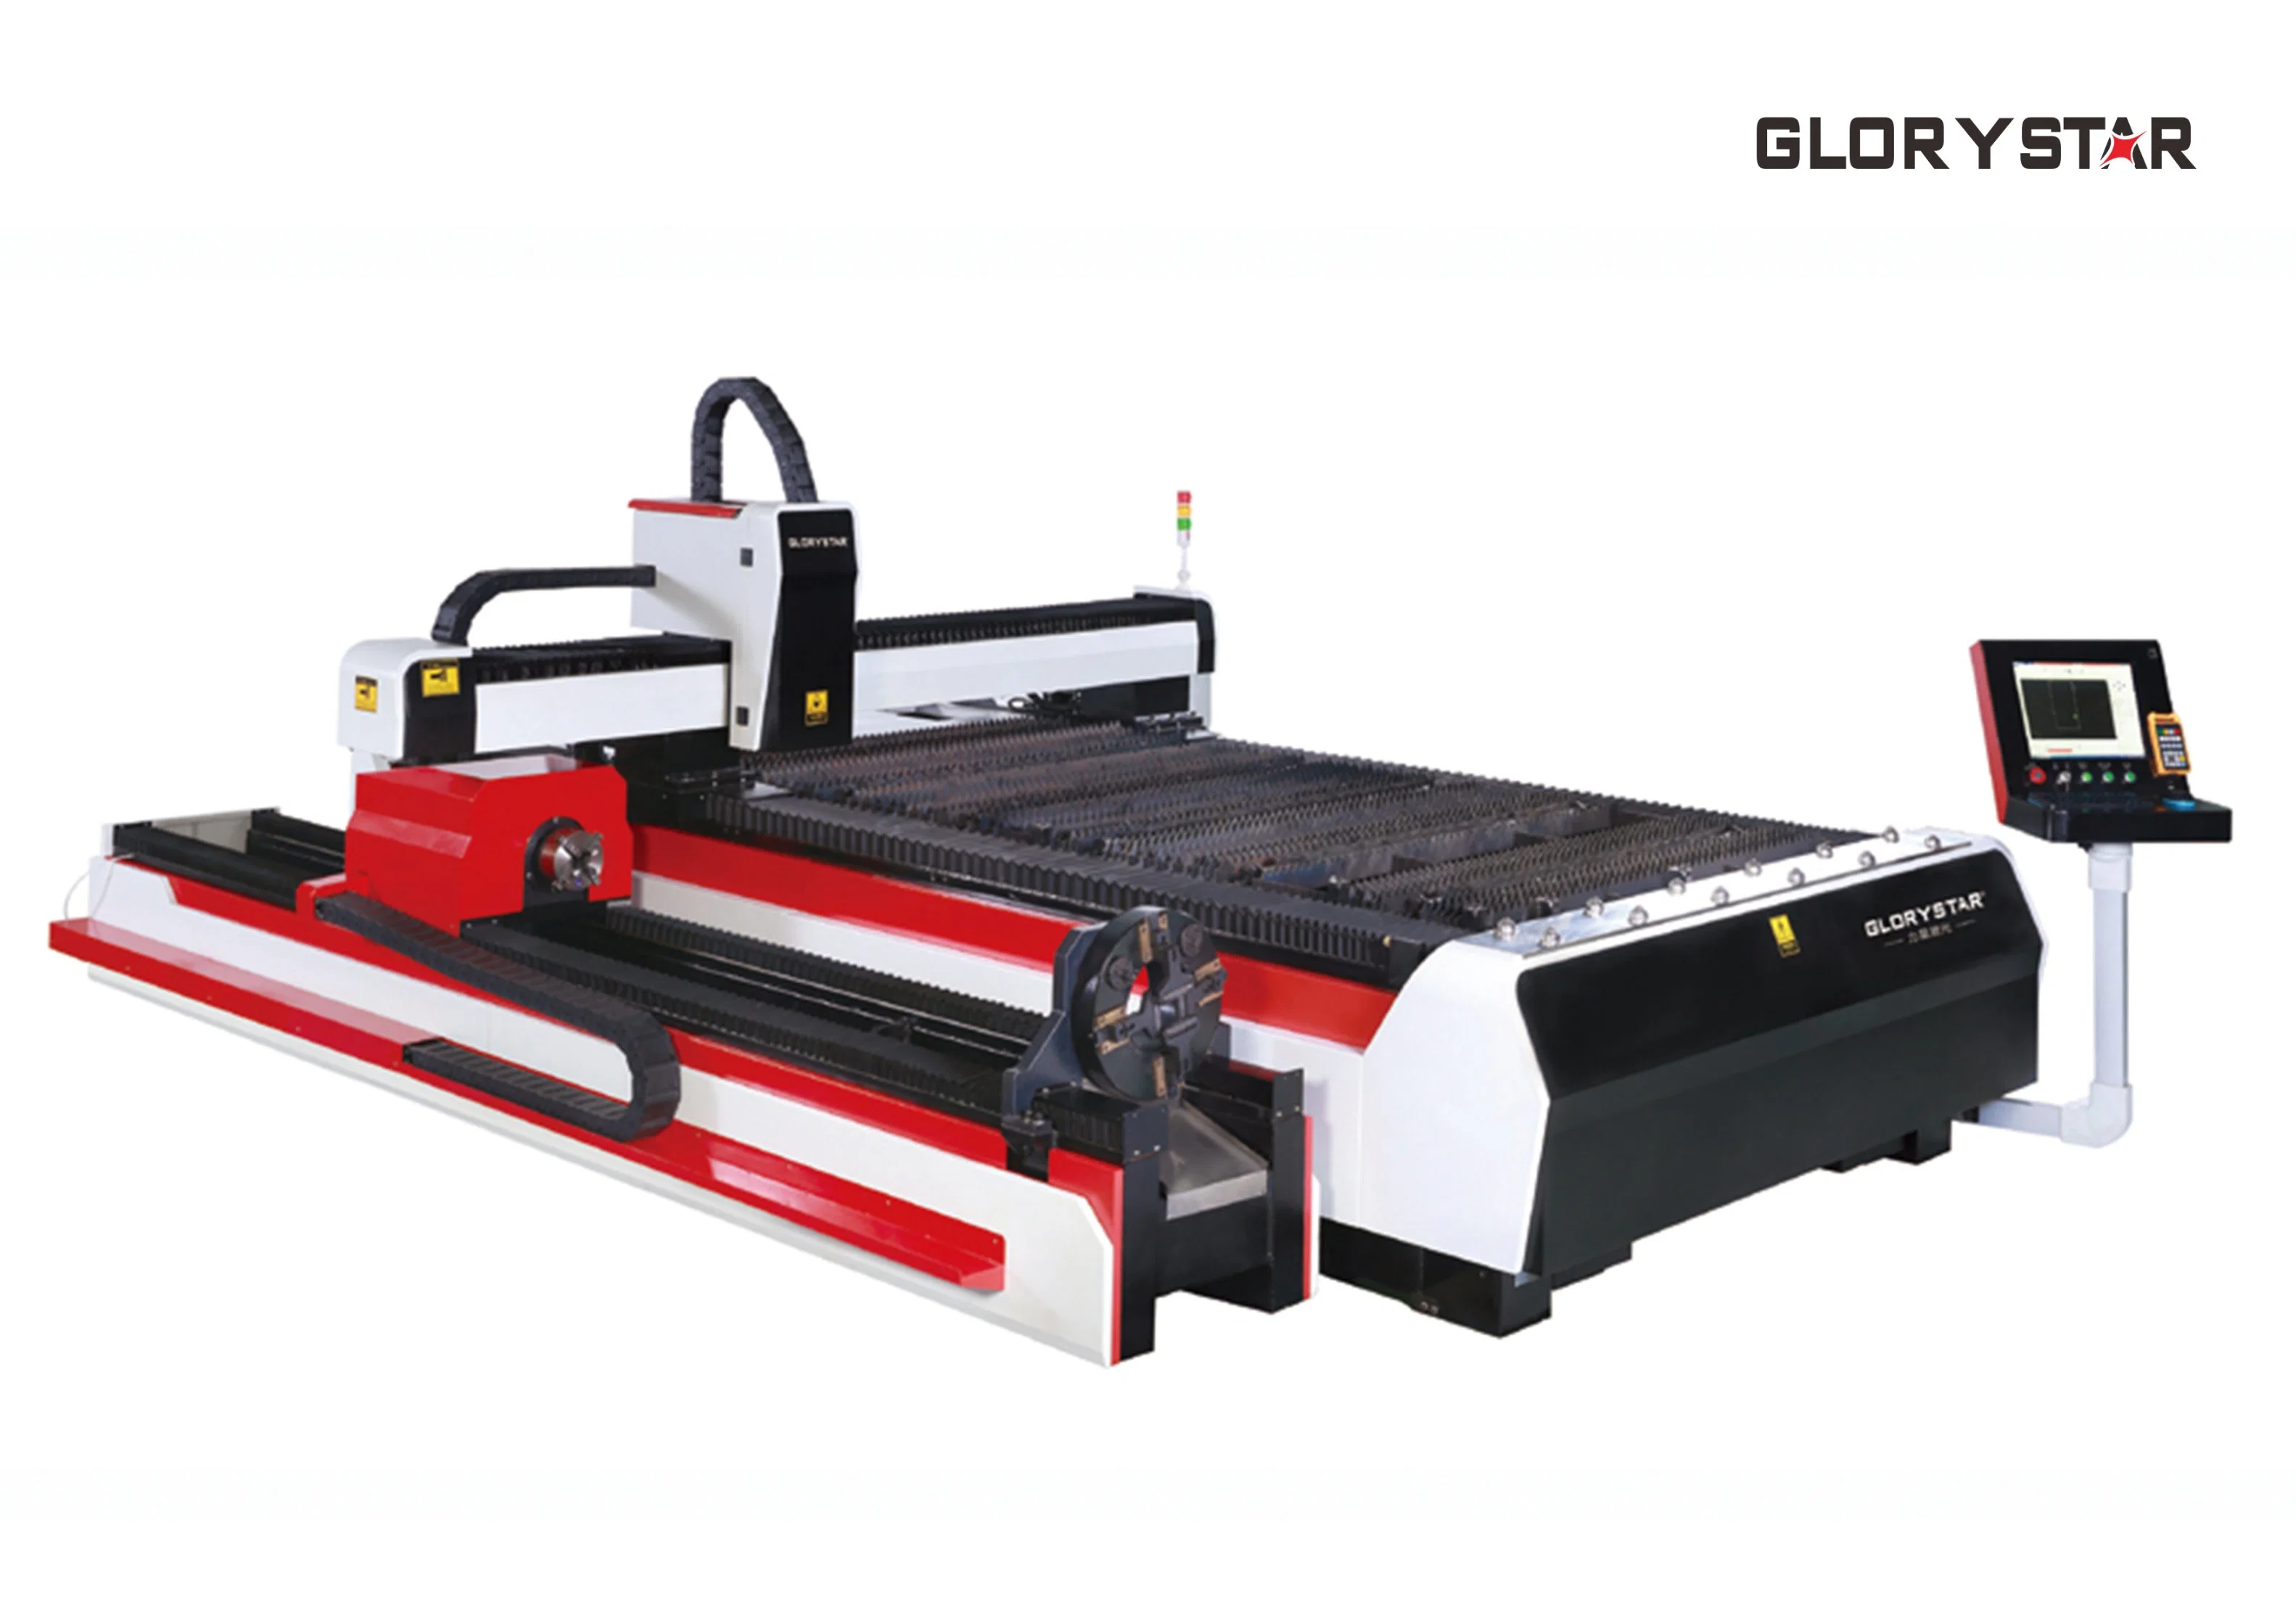 GS-3015g Plate & Tube Laser Cutter with Water Cooling